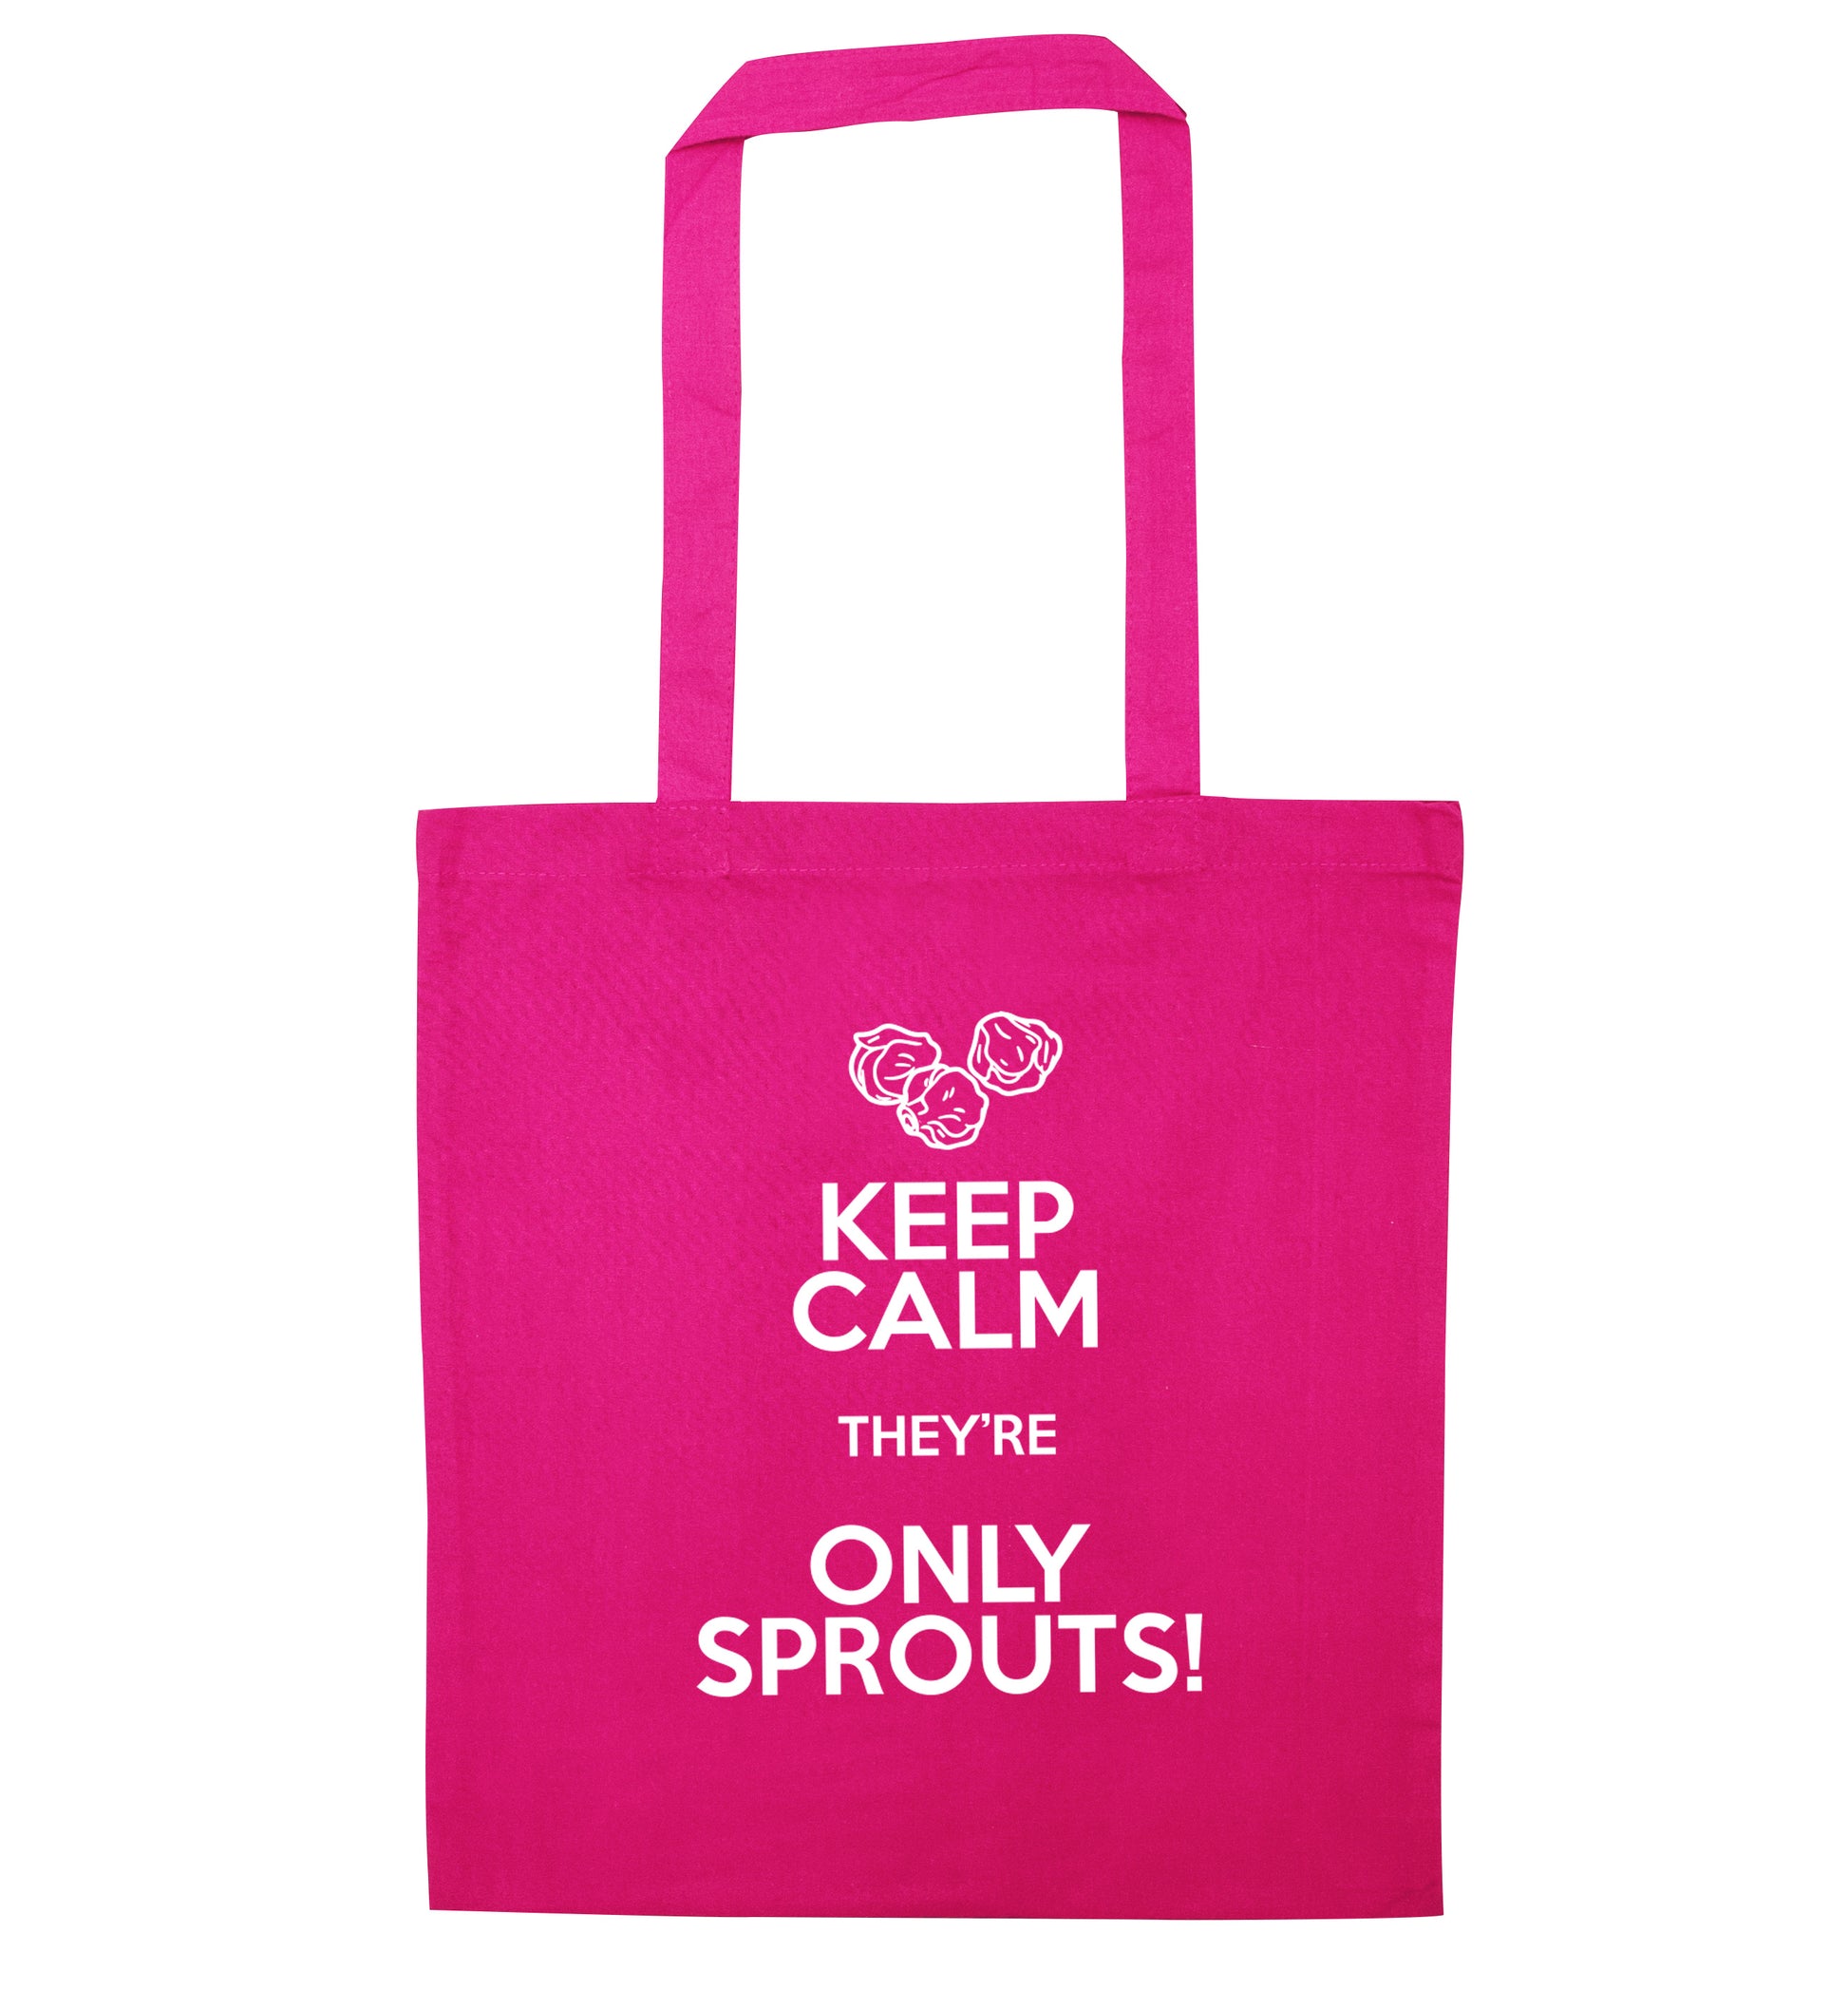 Keep calm they're only sprouts pink tote bag